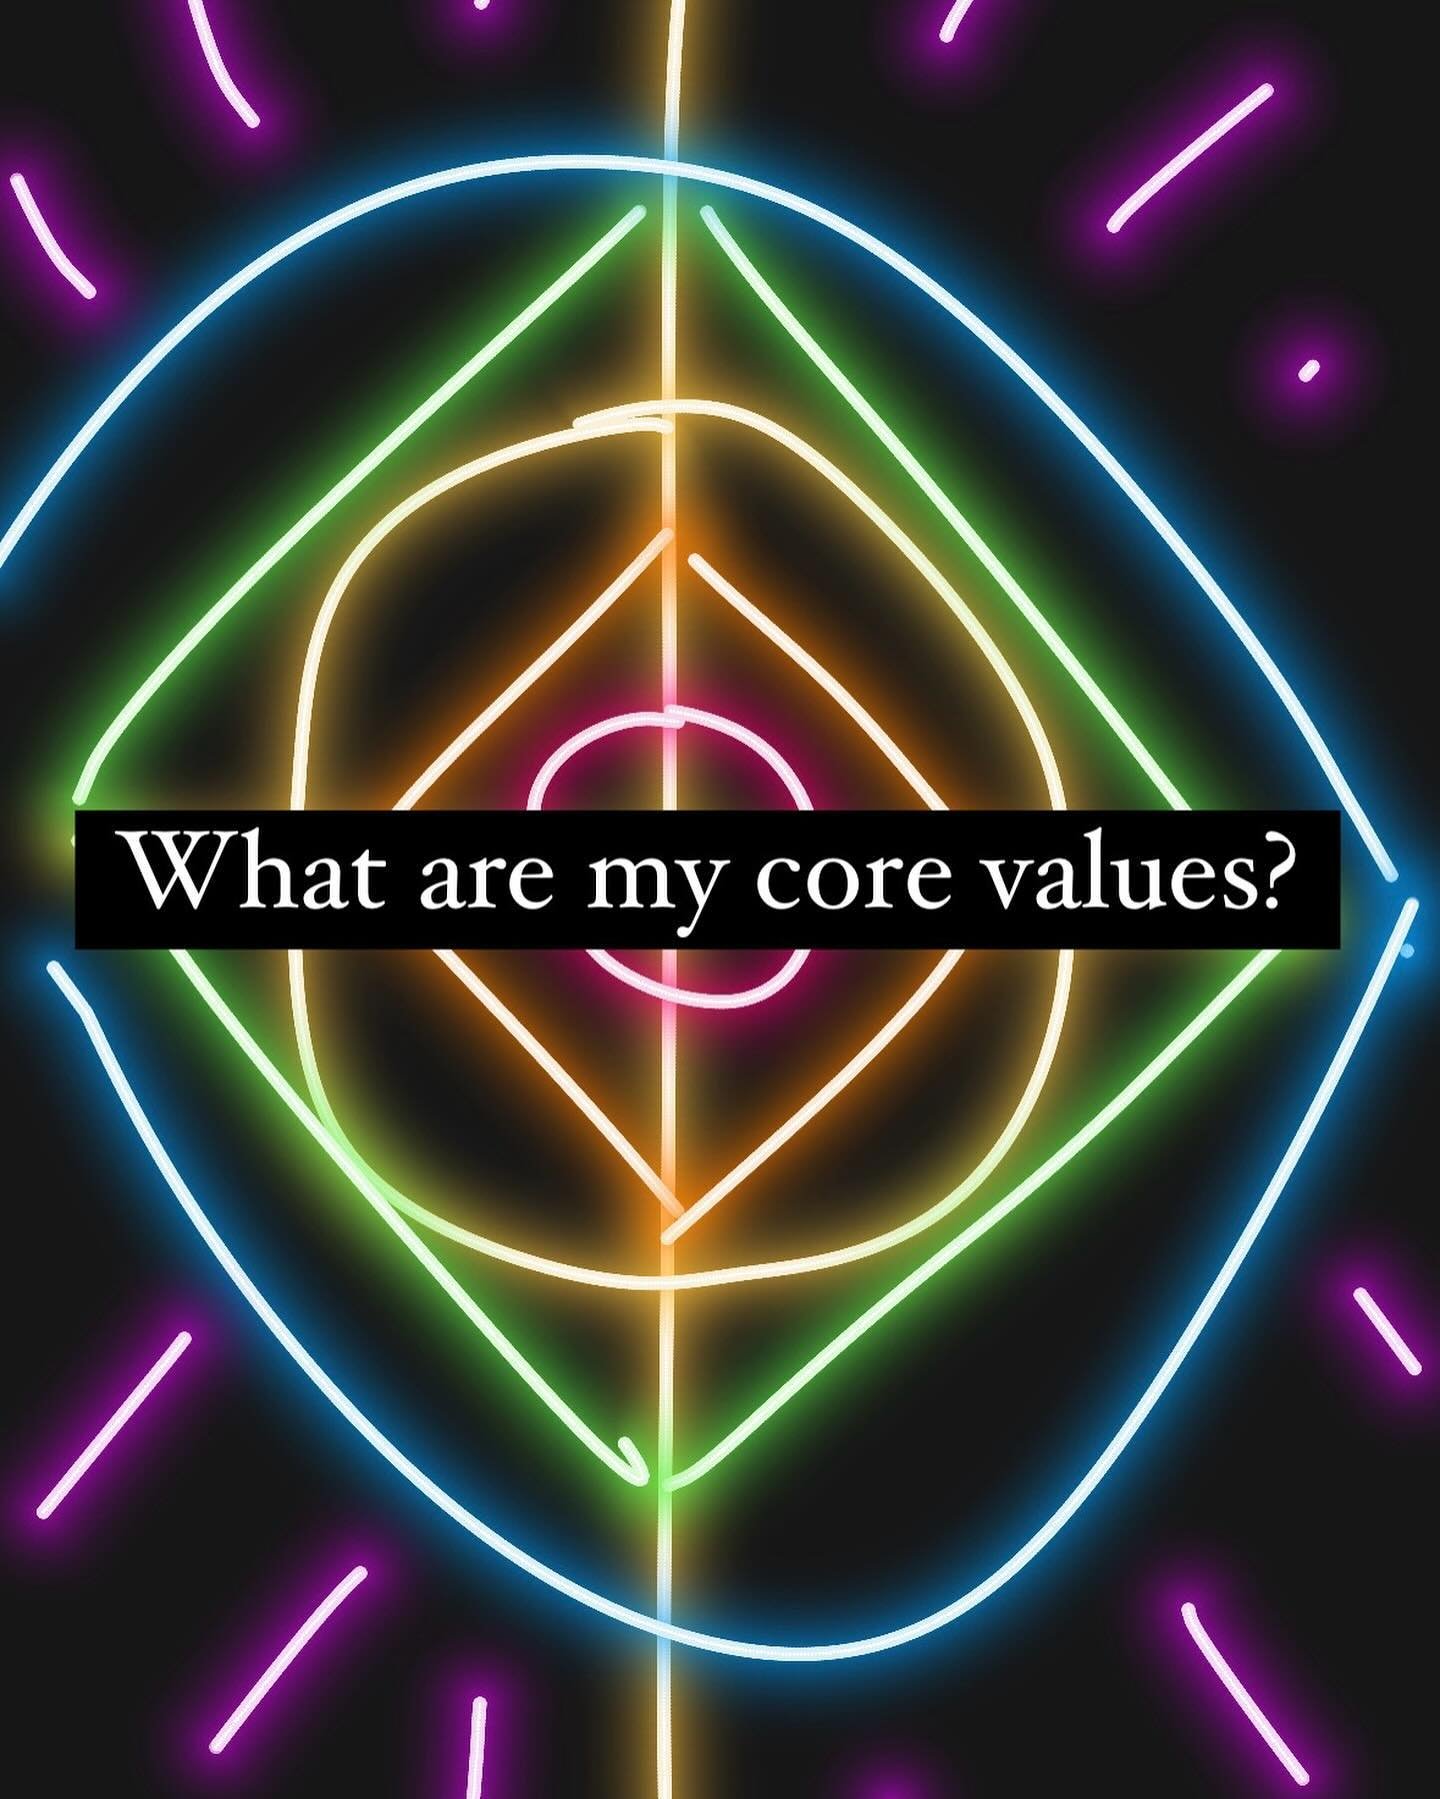 Very often we can forget who we truly are at our core. We can start acting in ways that are inconsistent with or contradictory to what we believe and value in life. Revisiting our core values and reframing or rewriting them in our own words can be a 